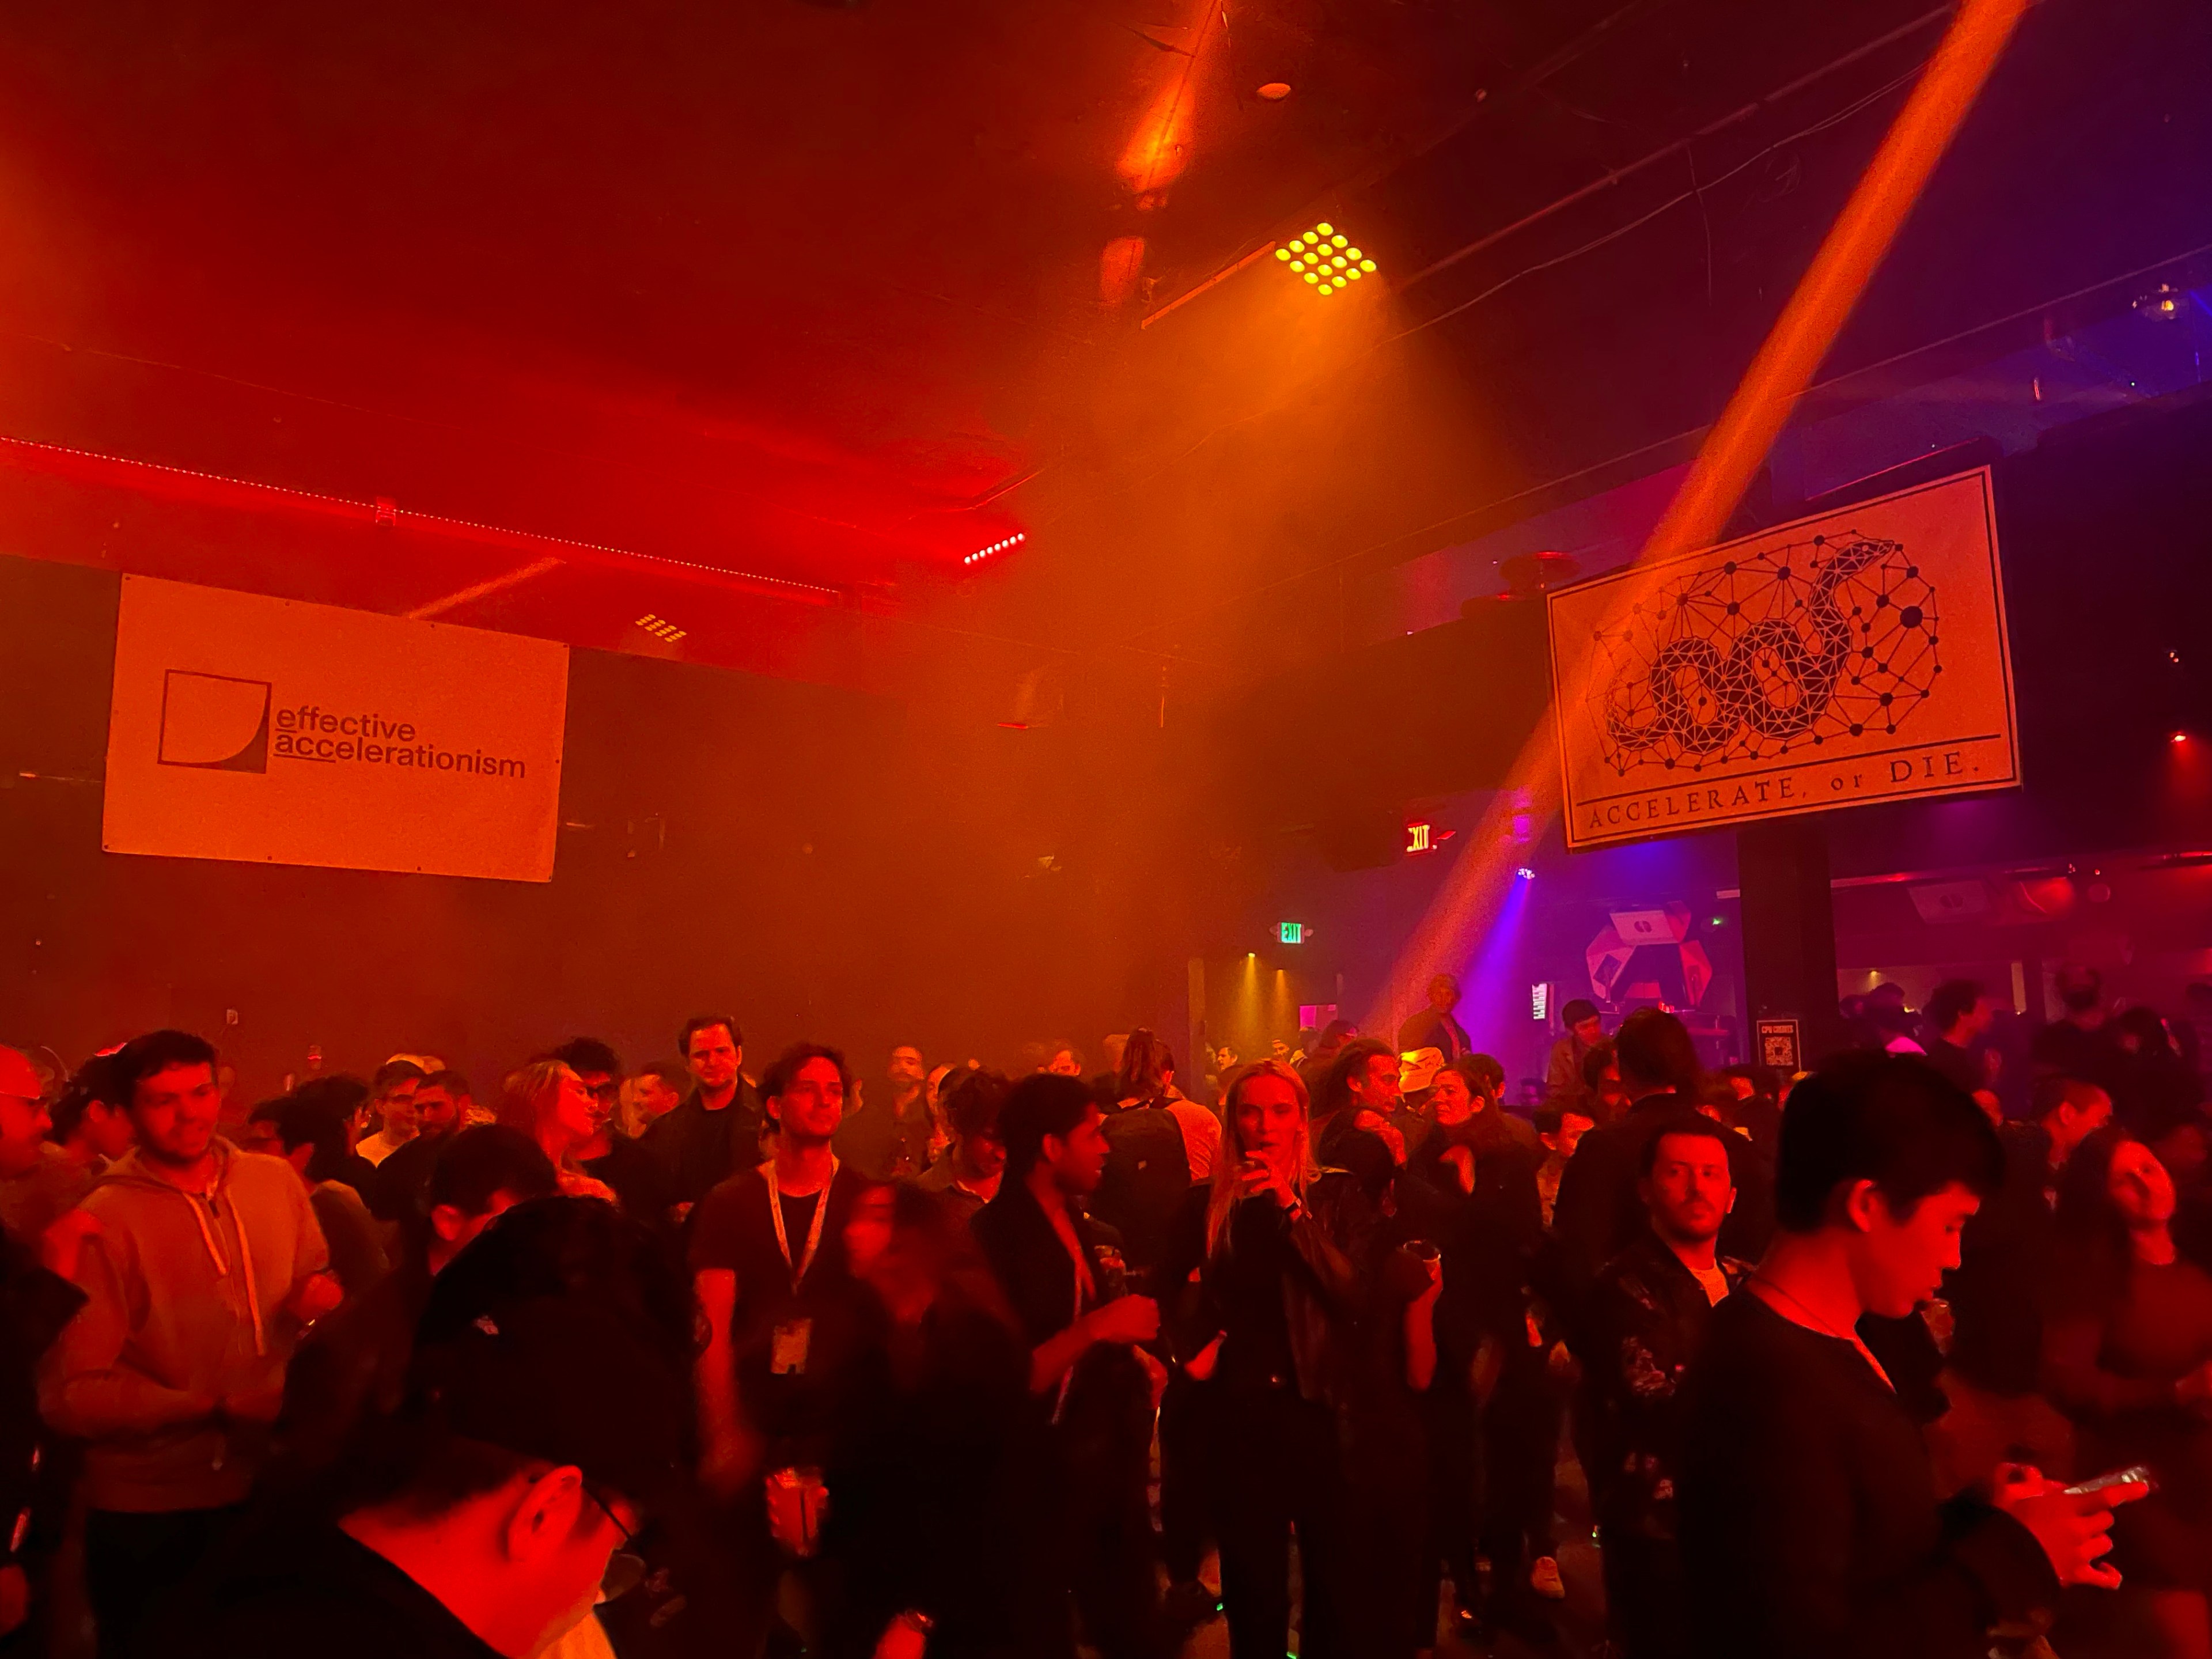 Hundreds of people stand on a nightclub dance floor bathed in red light with white posters reading "effective accelerationism" and "accelerate or die" hanging above them.